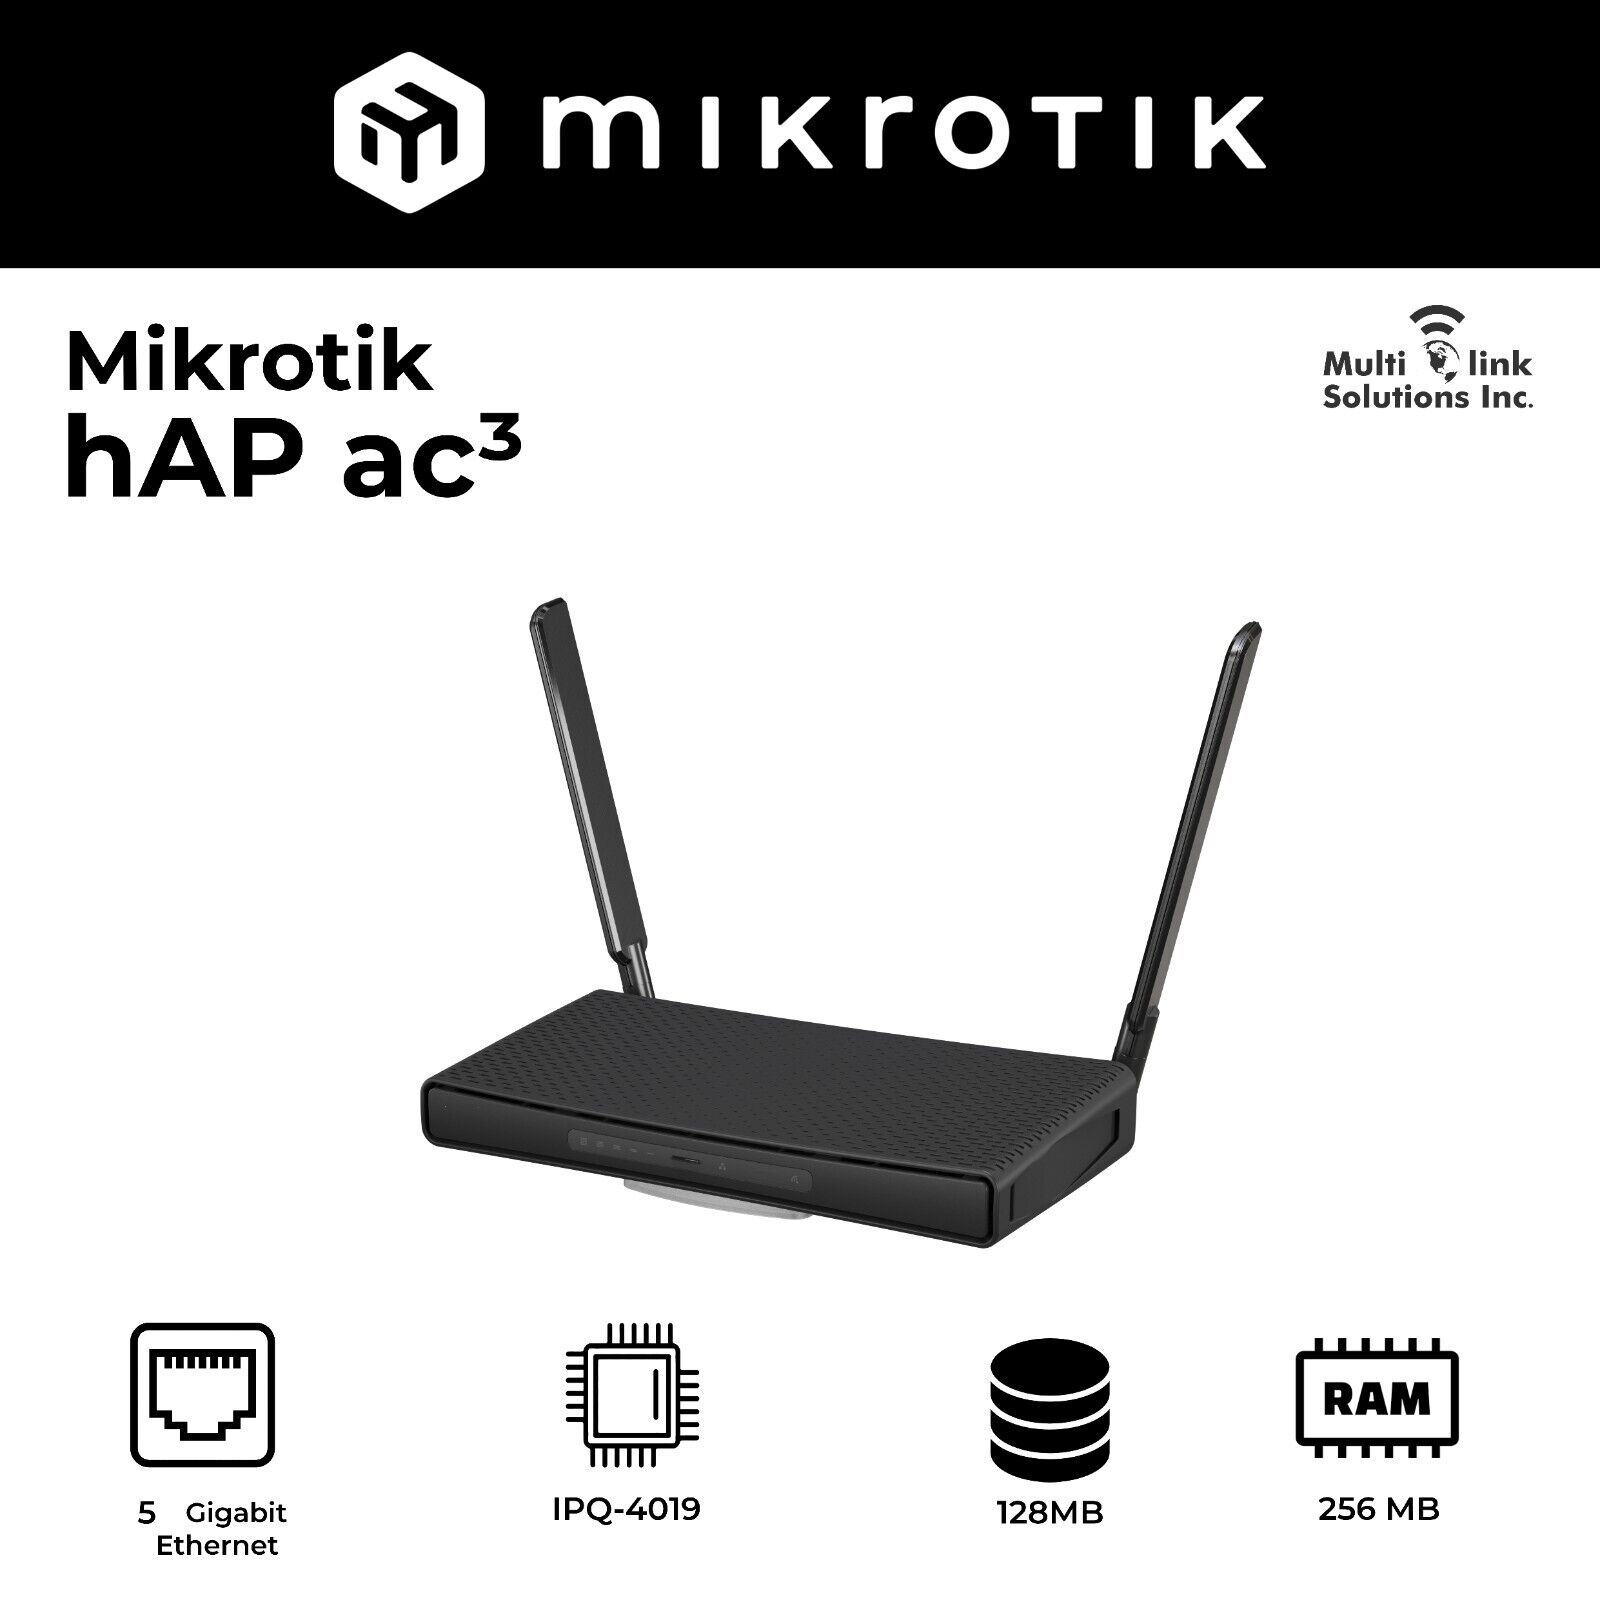 Mikrotik hAP ac3 Wireless Dual-Band Router with 5 GB Ethernet ports US Ver